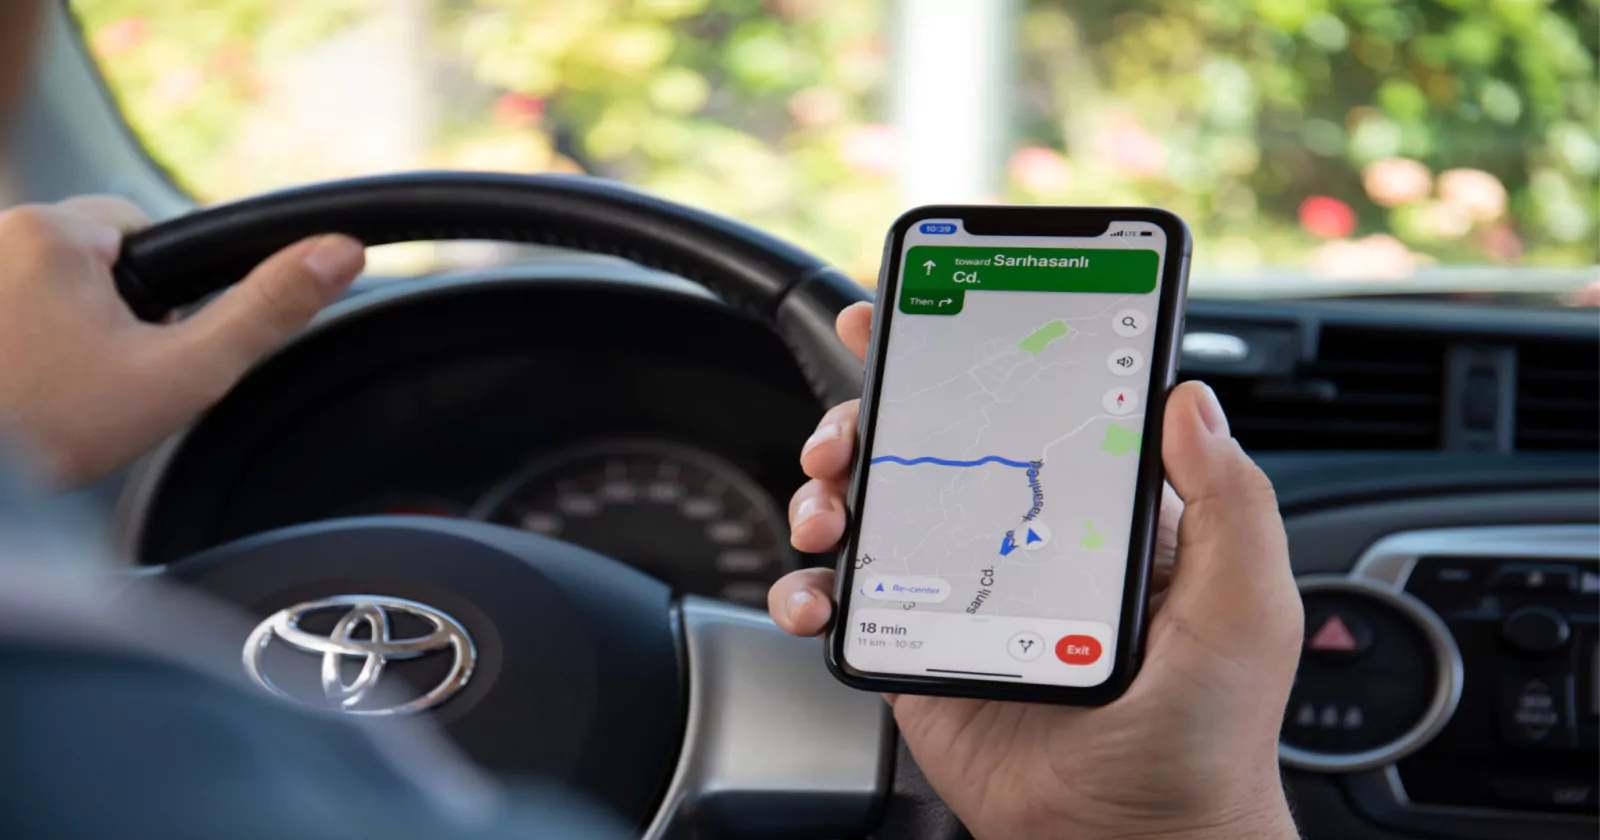 Millions of Users to Face Issues as Google Maps Drops Beloved Driving Assistance